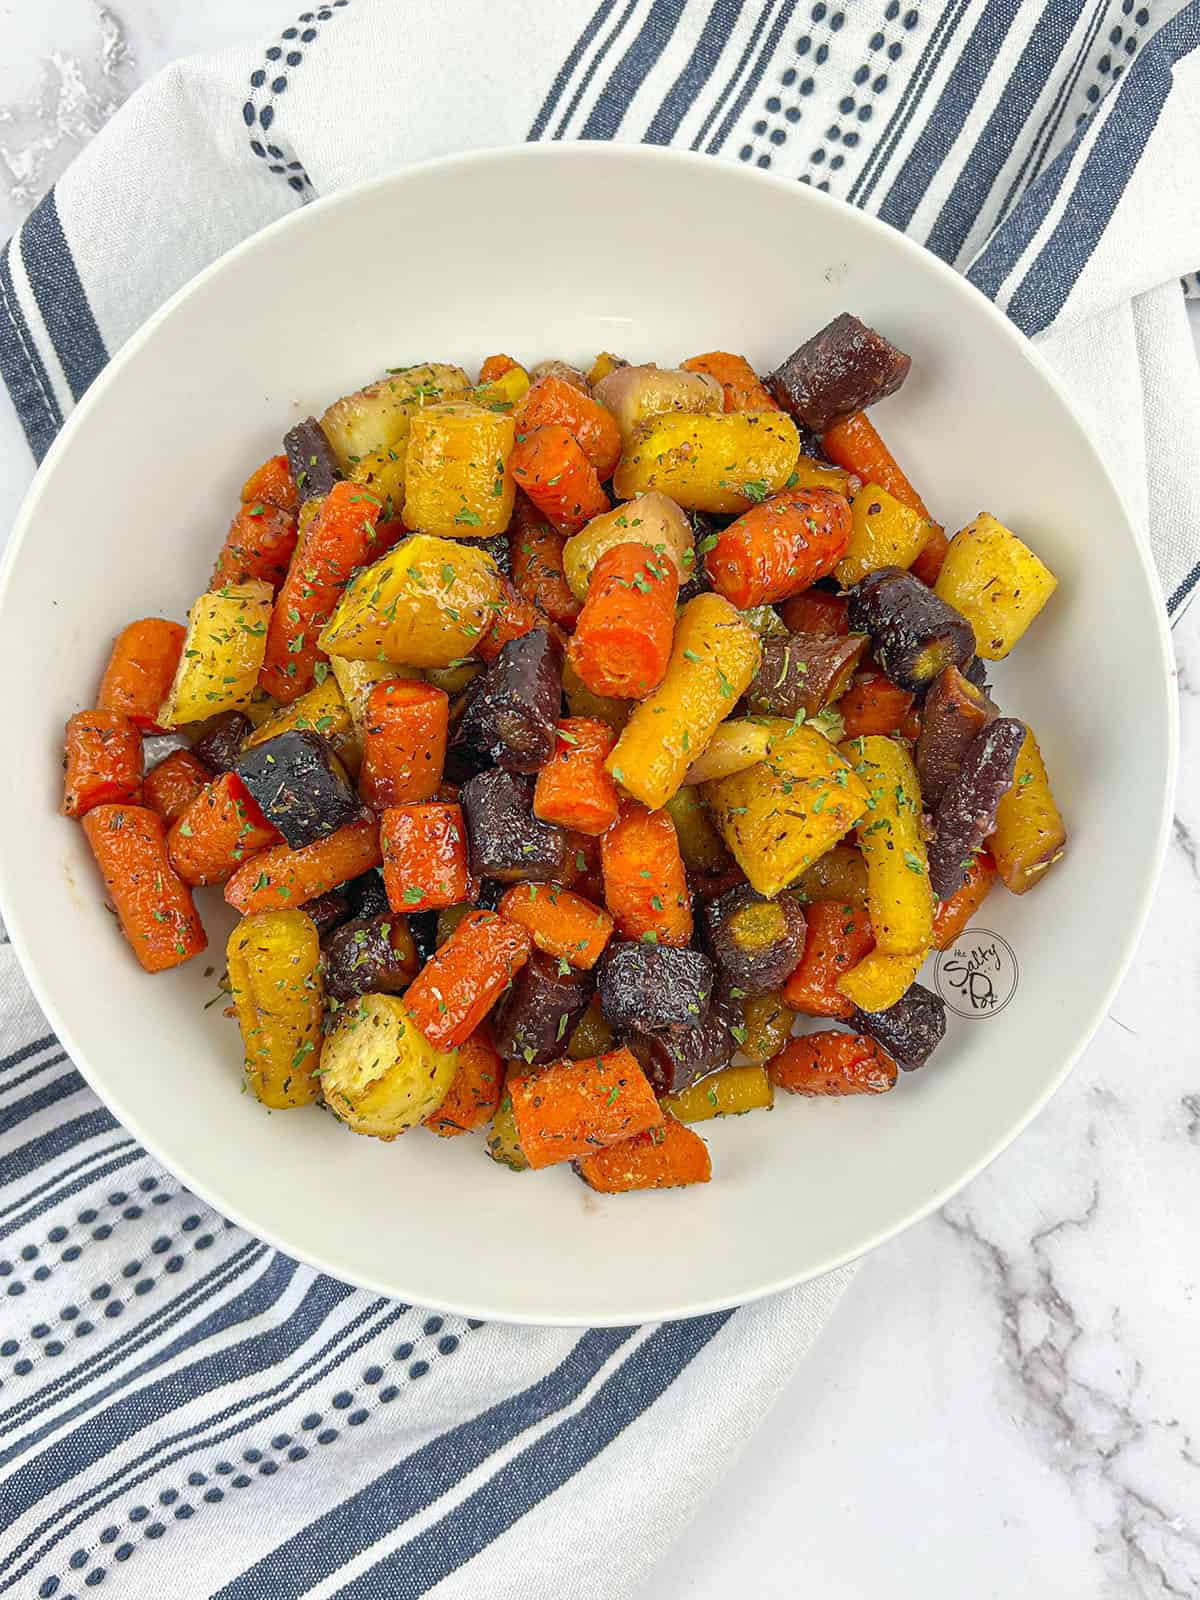 Honey ginger roasted rainbow carrots in a white bowl.